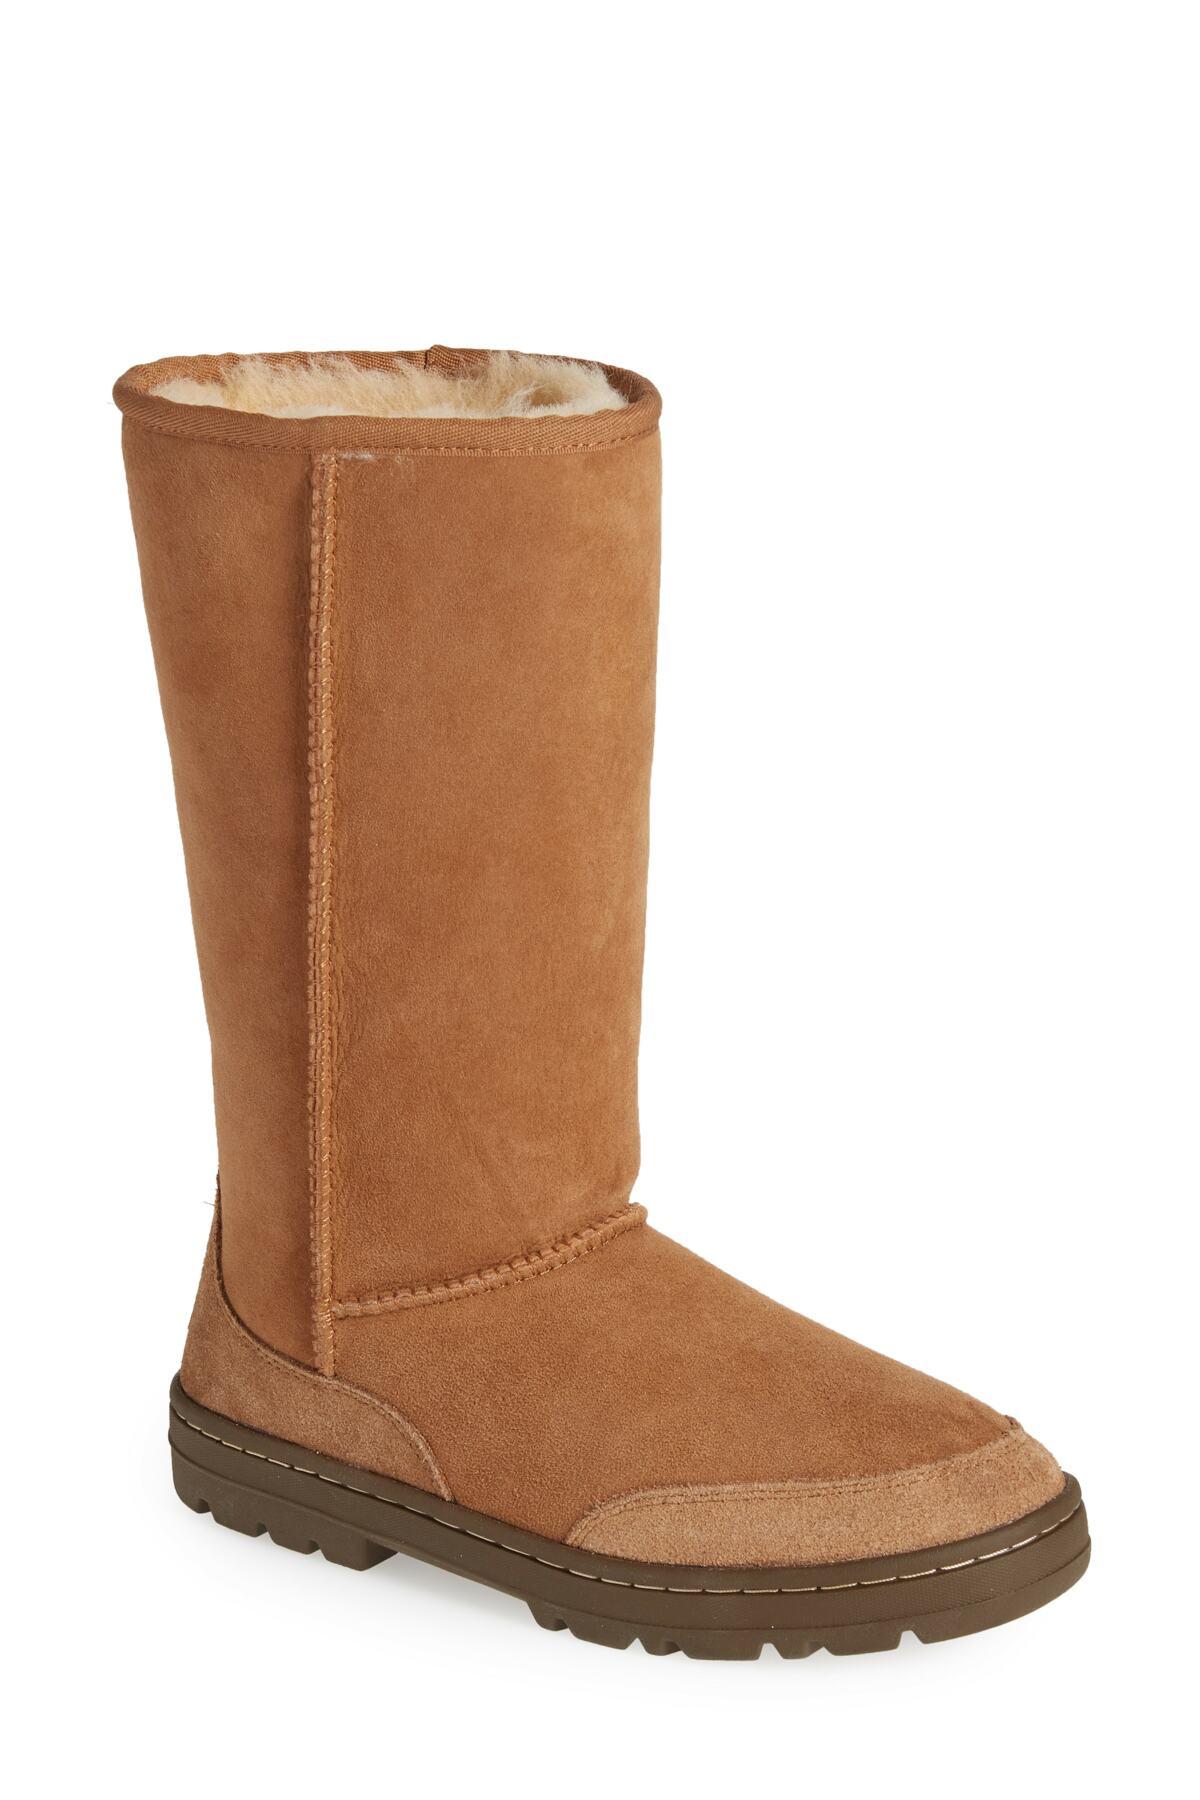 UGG Leather Ultra Revival Genuine Sheepskin Lined Tall Boot - Narrow Calf  in Brown - Lyst